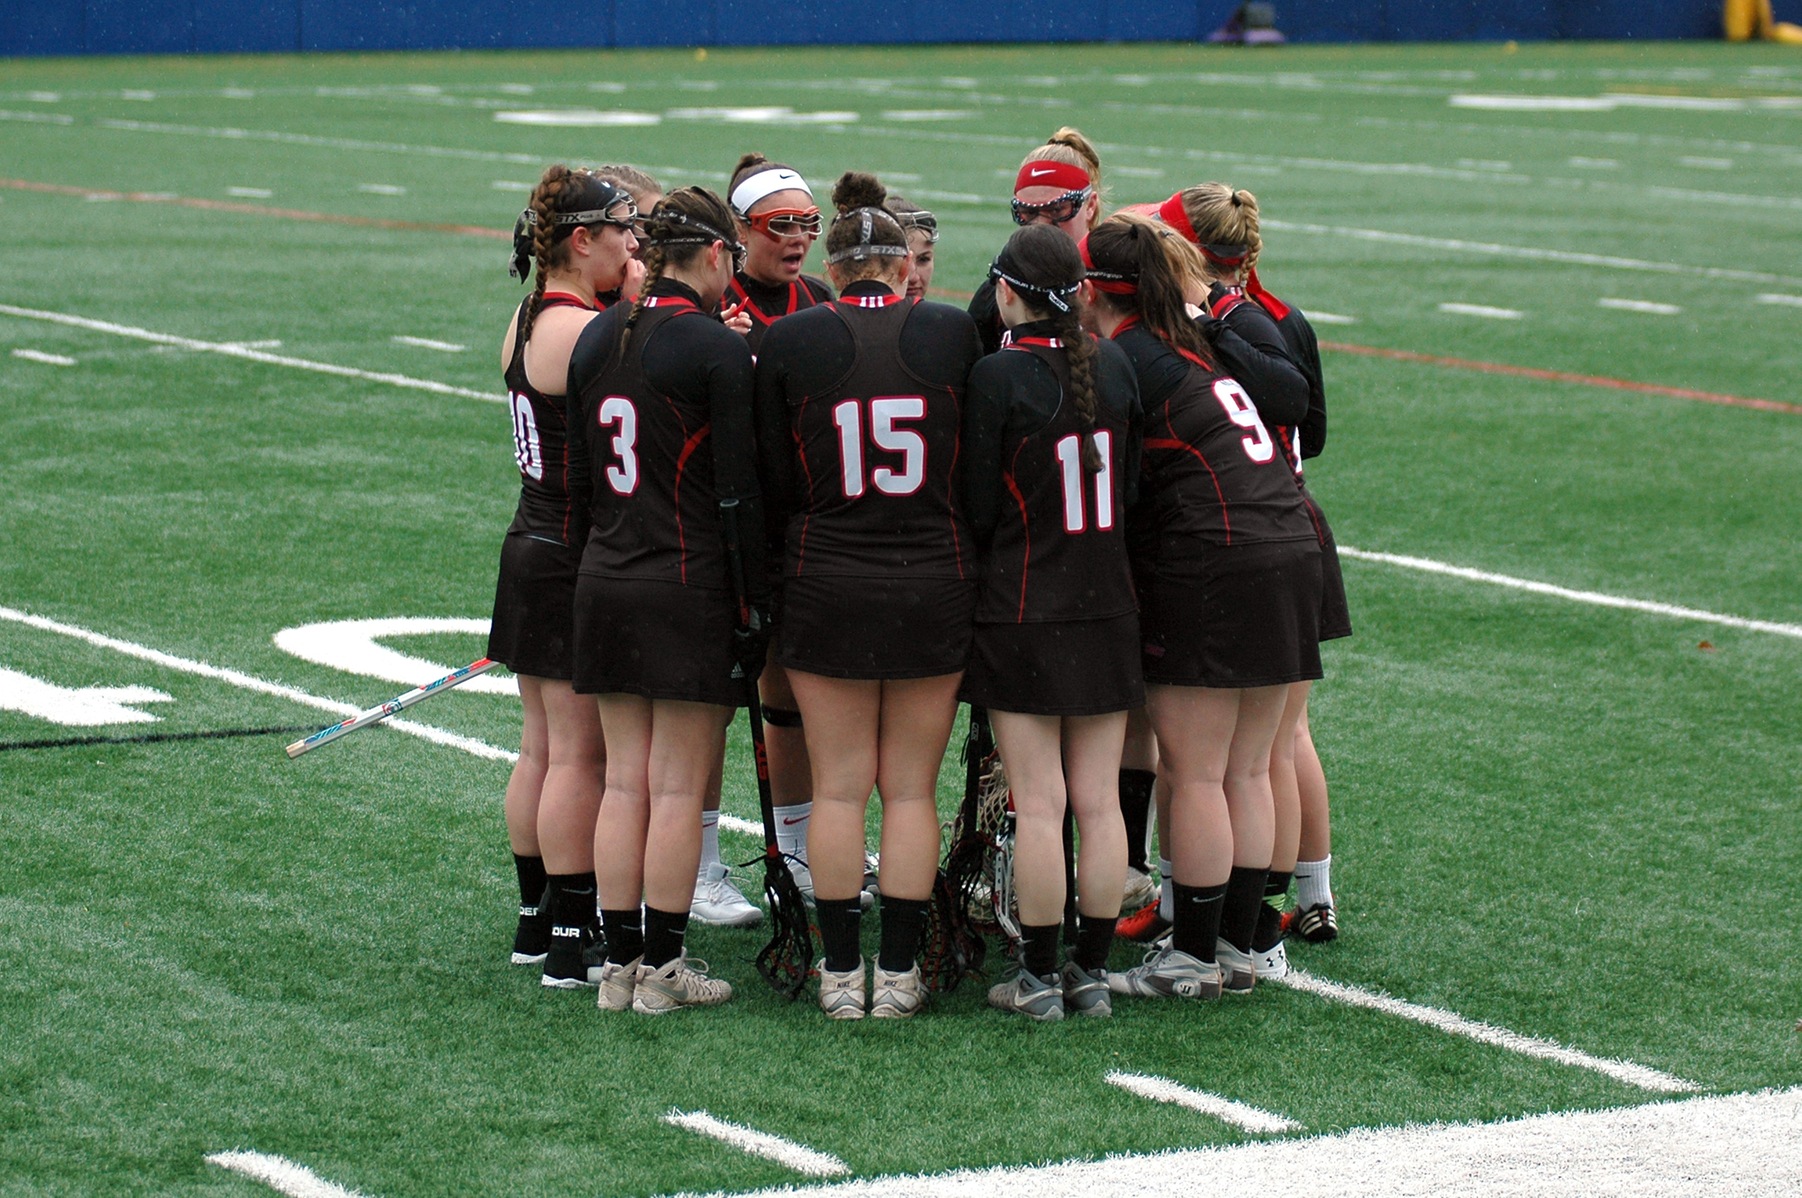 The Dominican College women's lacrosse team defeated Felician University today.